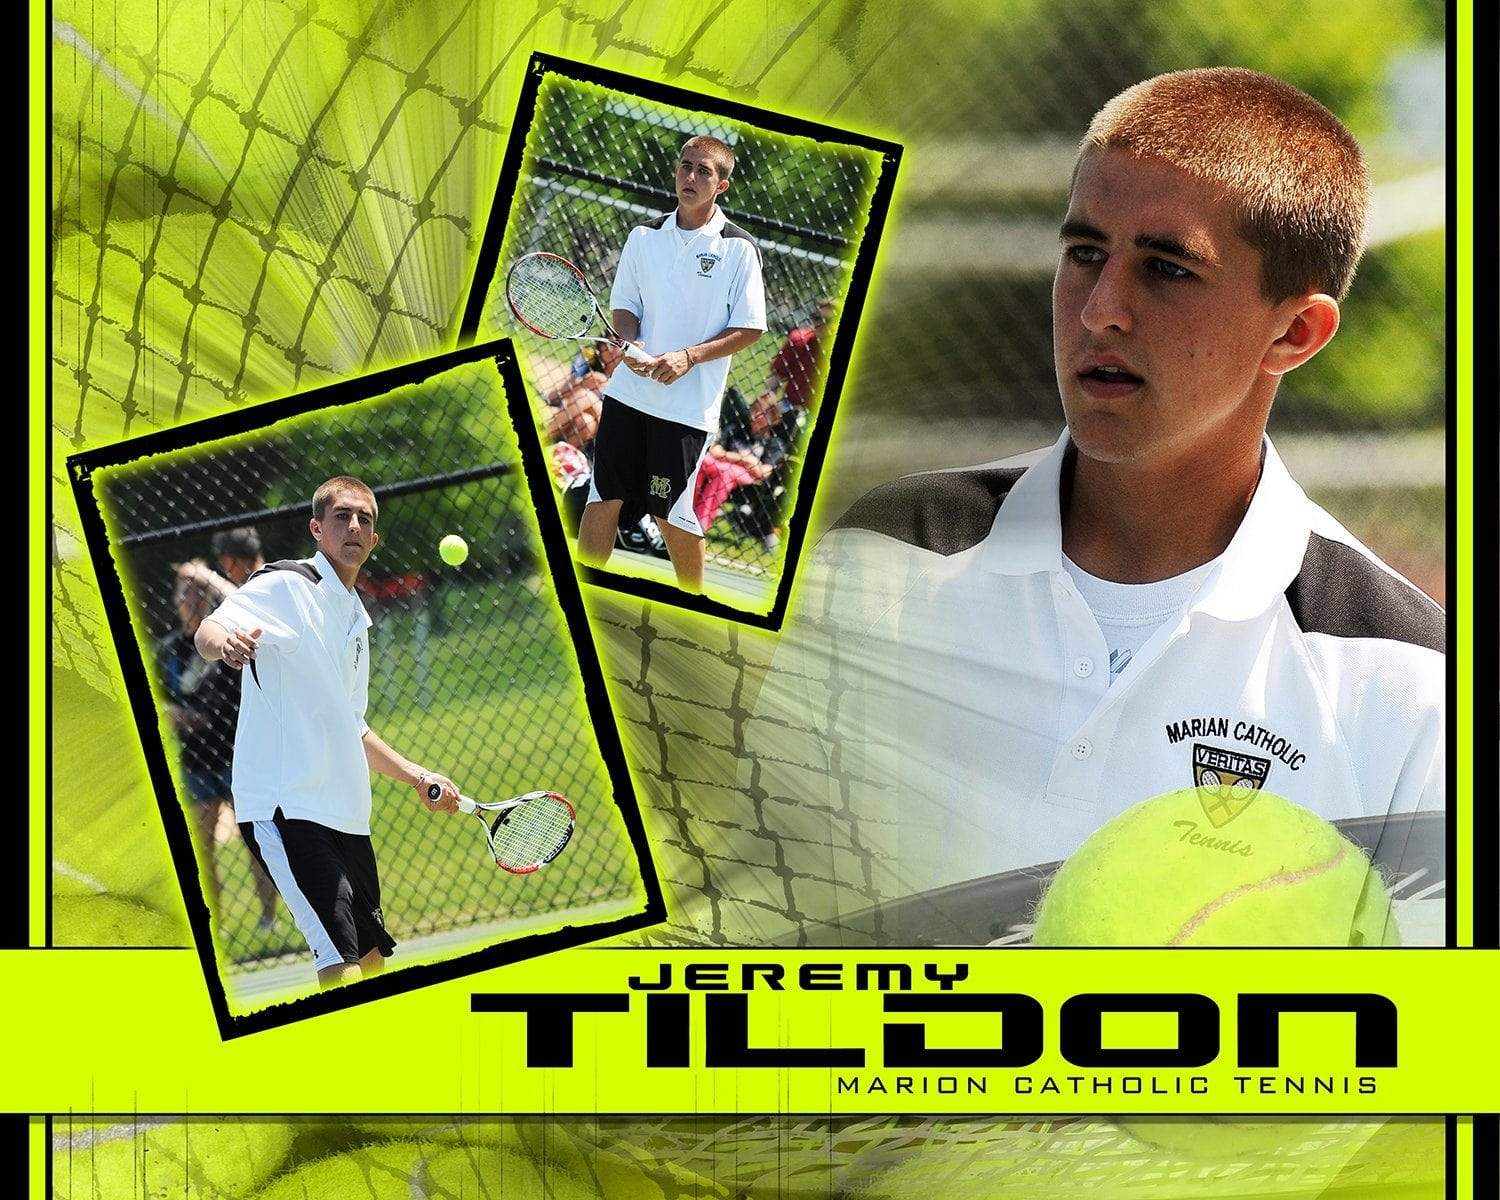 Tennis v.5 - Action Drop In Poster/Banner-Photoshop Template - Photo Solutions